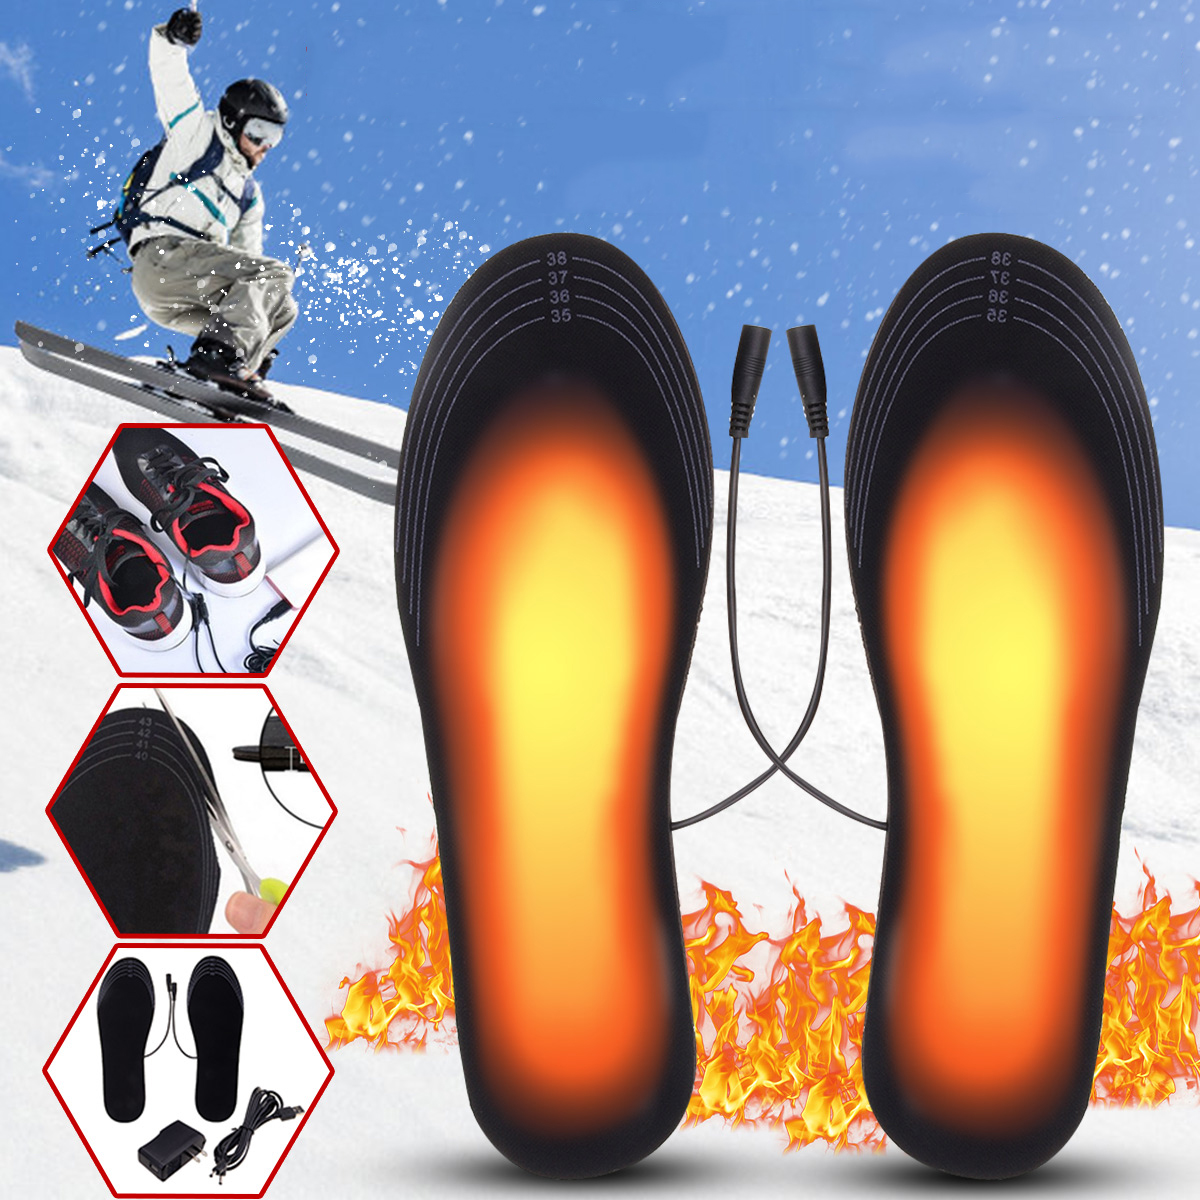 

5V 2A Electric Heated Feet Shoe Insole USB Foot Heater Warmer Breathable Deodorant With Adapter